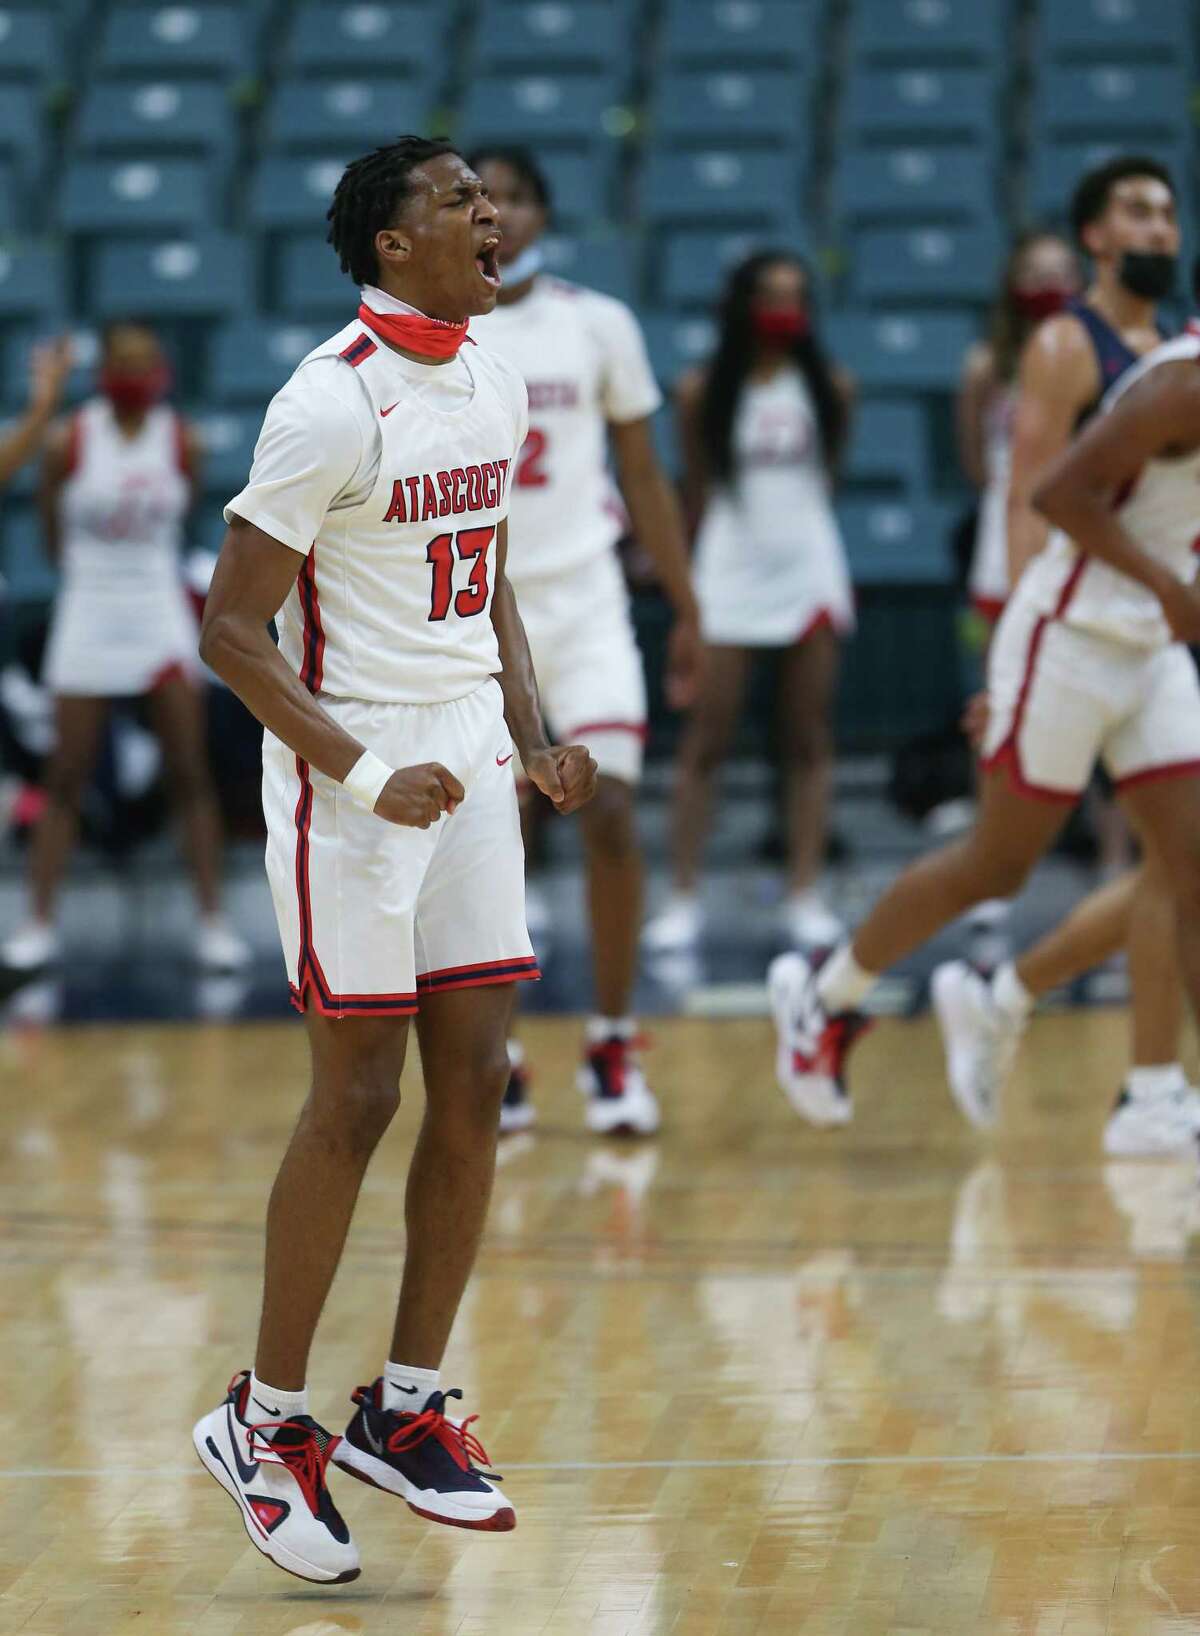 Atascocita guard Justin Collins reacts to sinking a three pointer against Dawson High School during 6A regional quarterfinals playoff game at Merrell Center in Katy on Saturday, Feb. 27, 2021. Atascocita won the game 55-54.